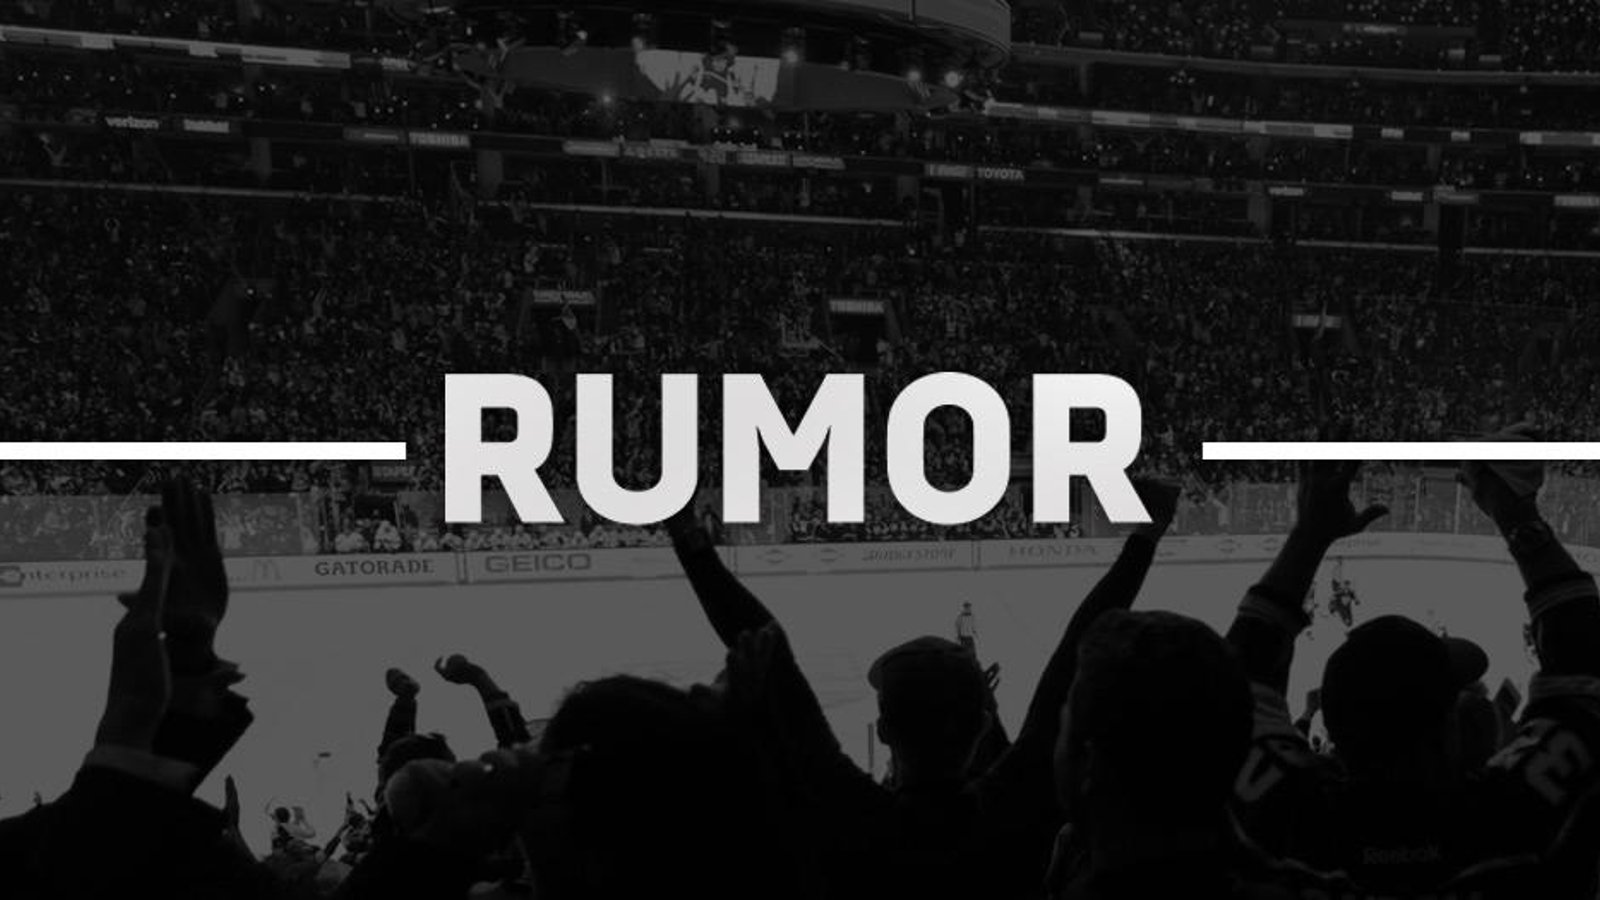 Rumor: Former first round pick expected to sign first NHL deal, could impact playoffs.